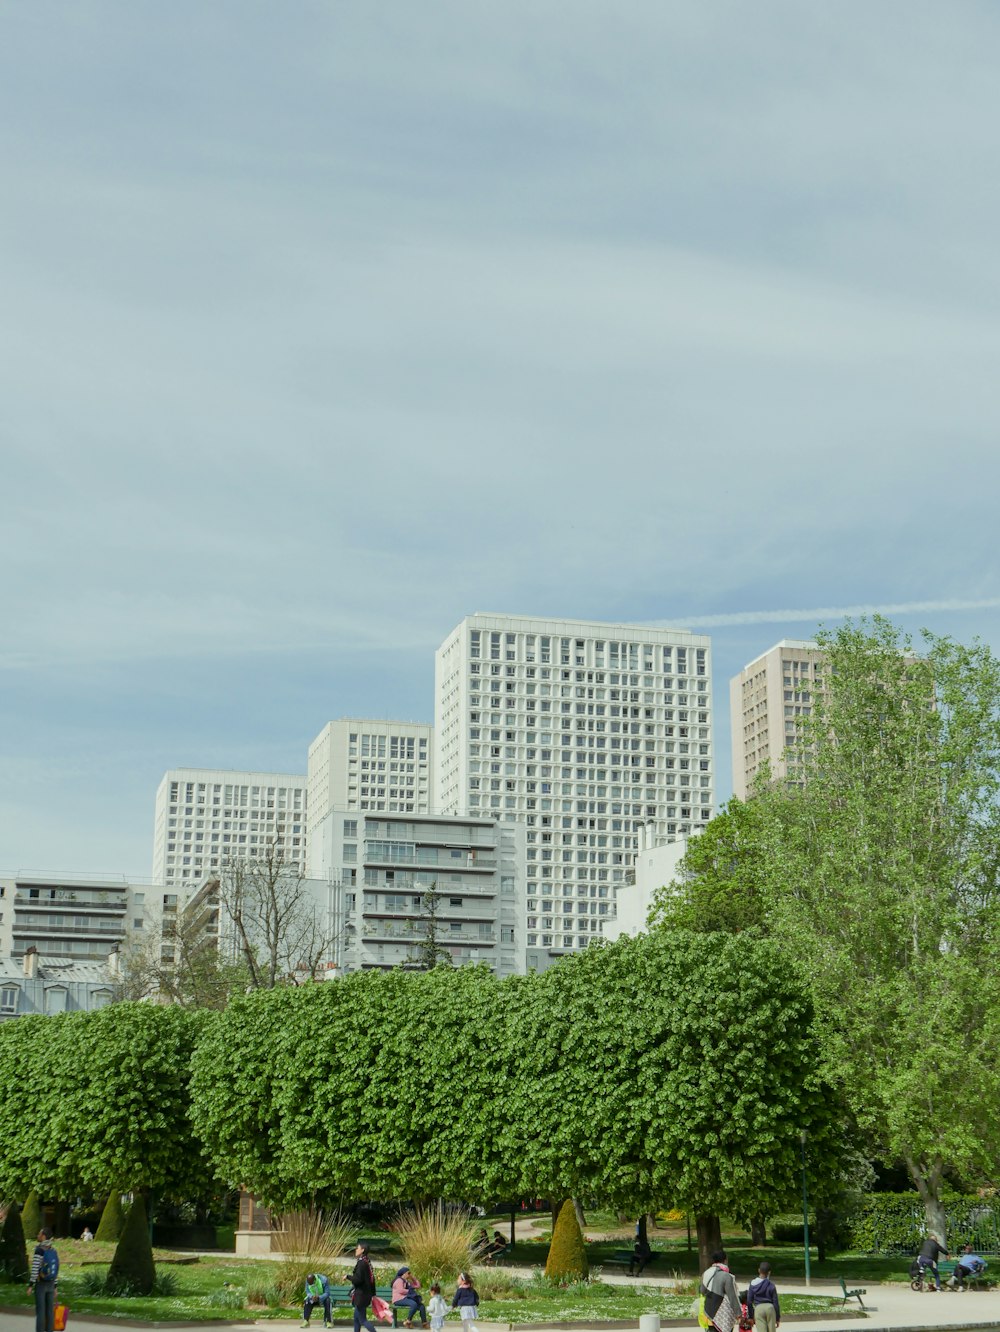 a group of people walking around a park with trees and buildings in the background